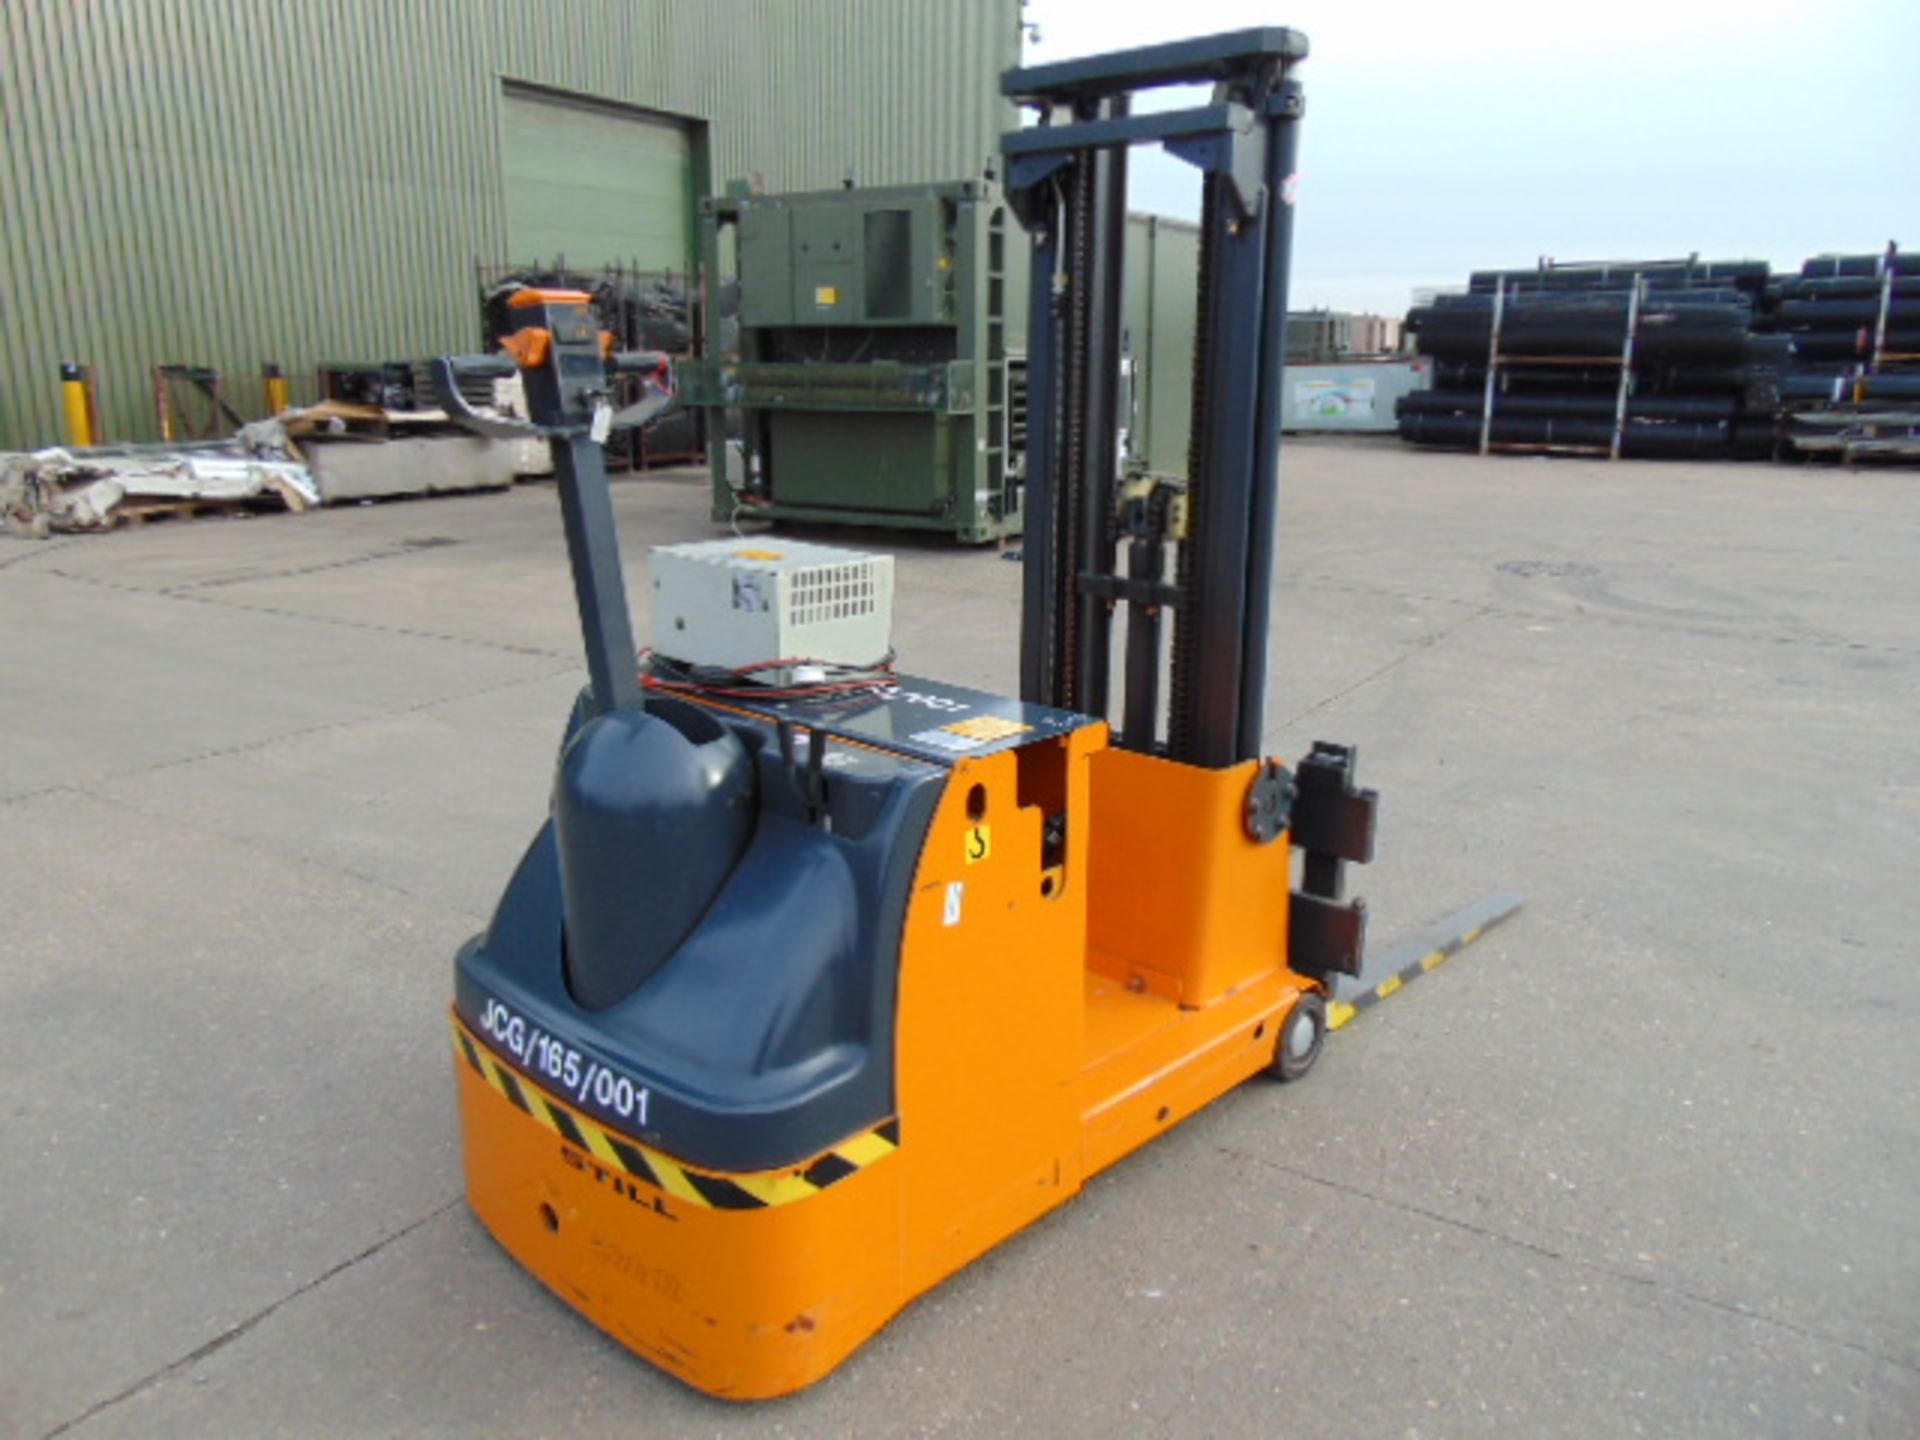 Still EGG10 Electric Pedestrian Pallet Stacker c/w Charger - Image 6 of 18